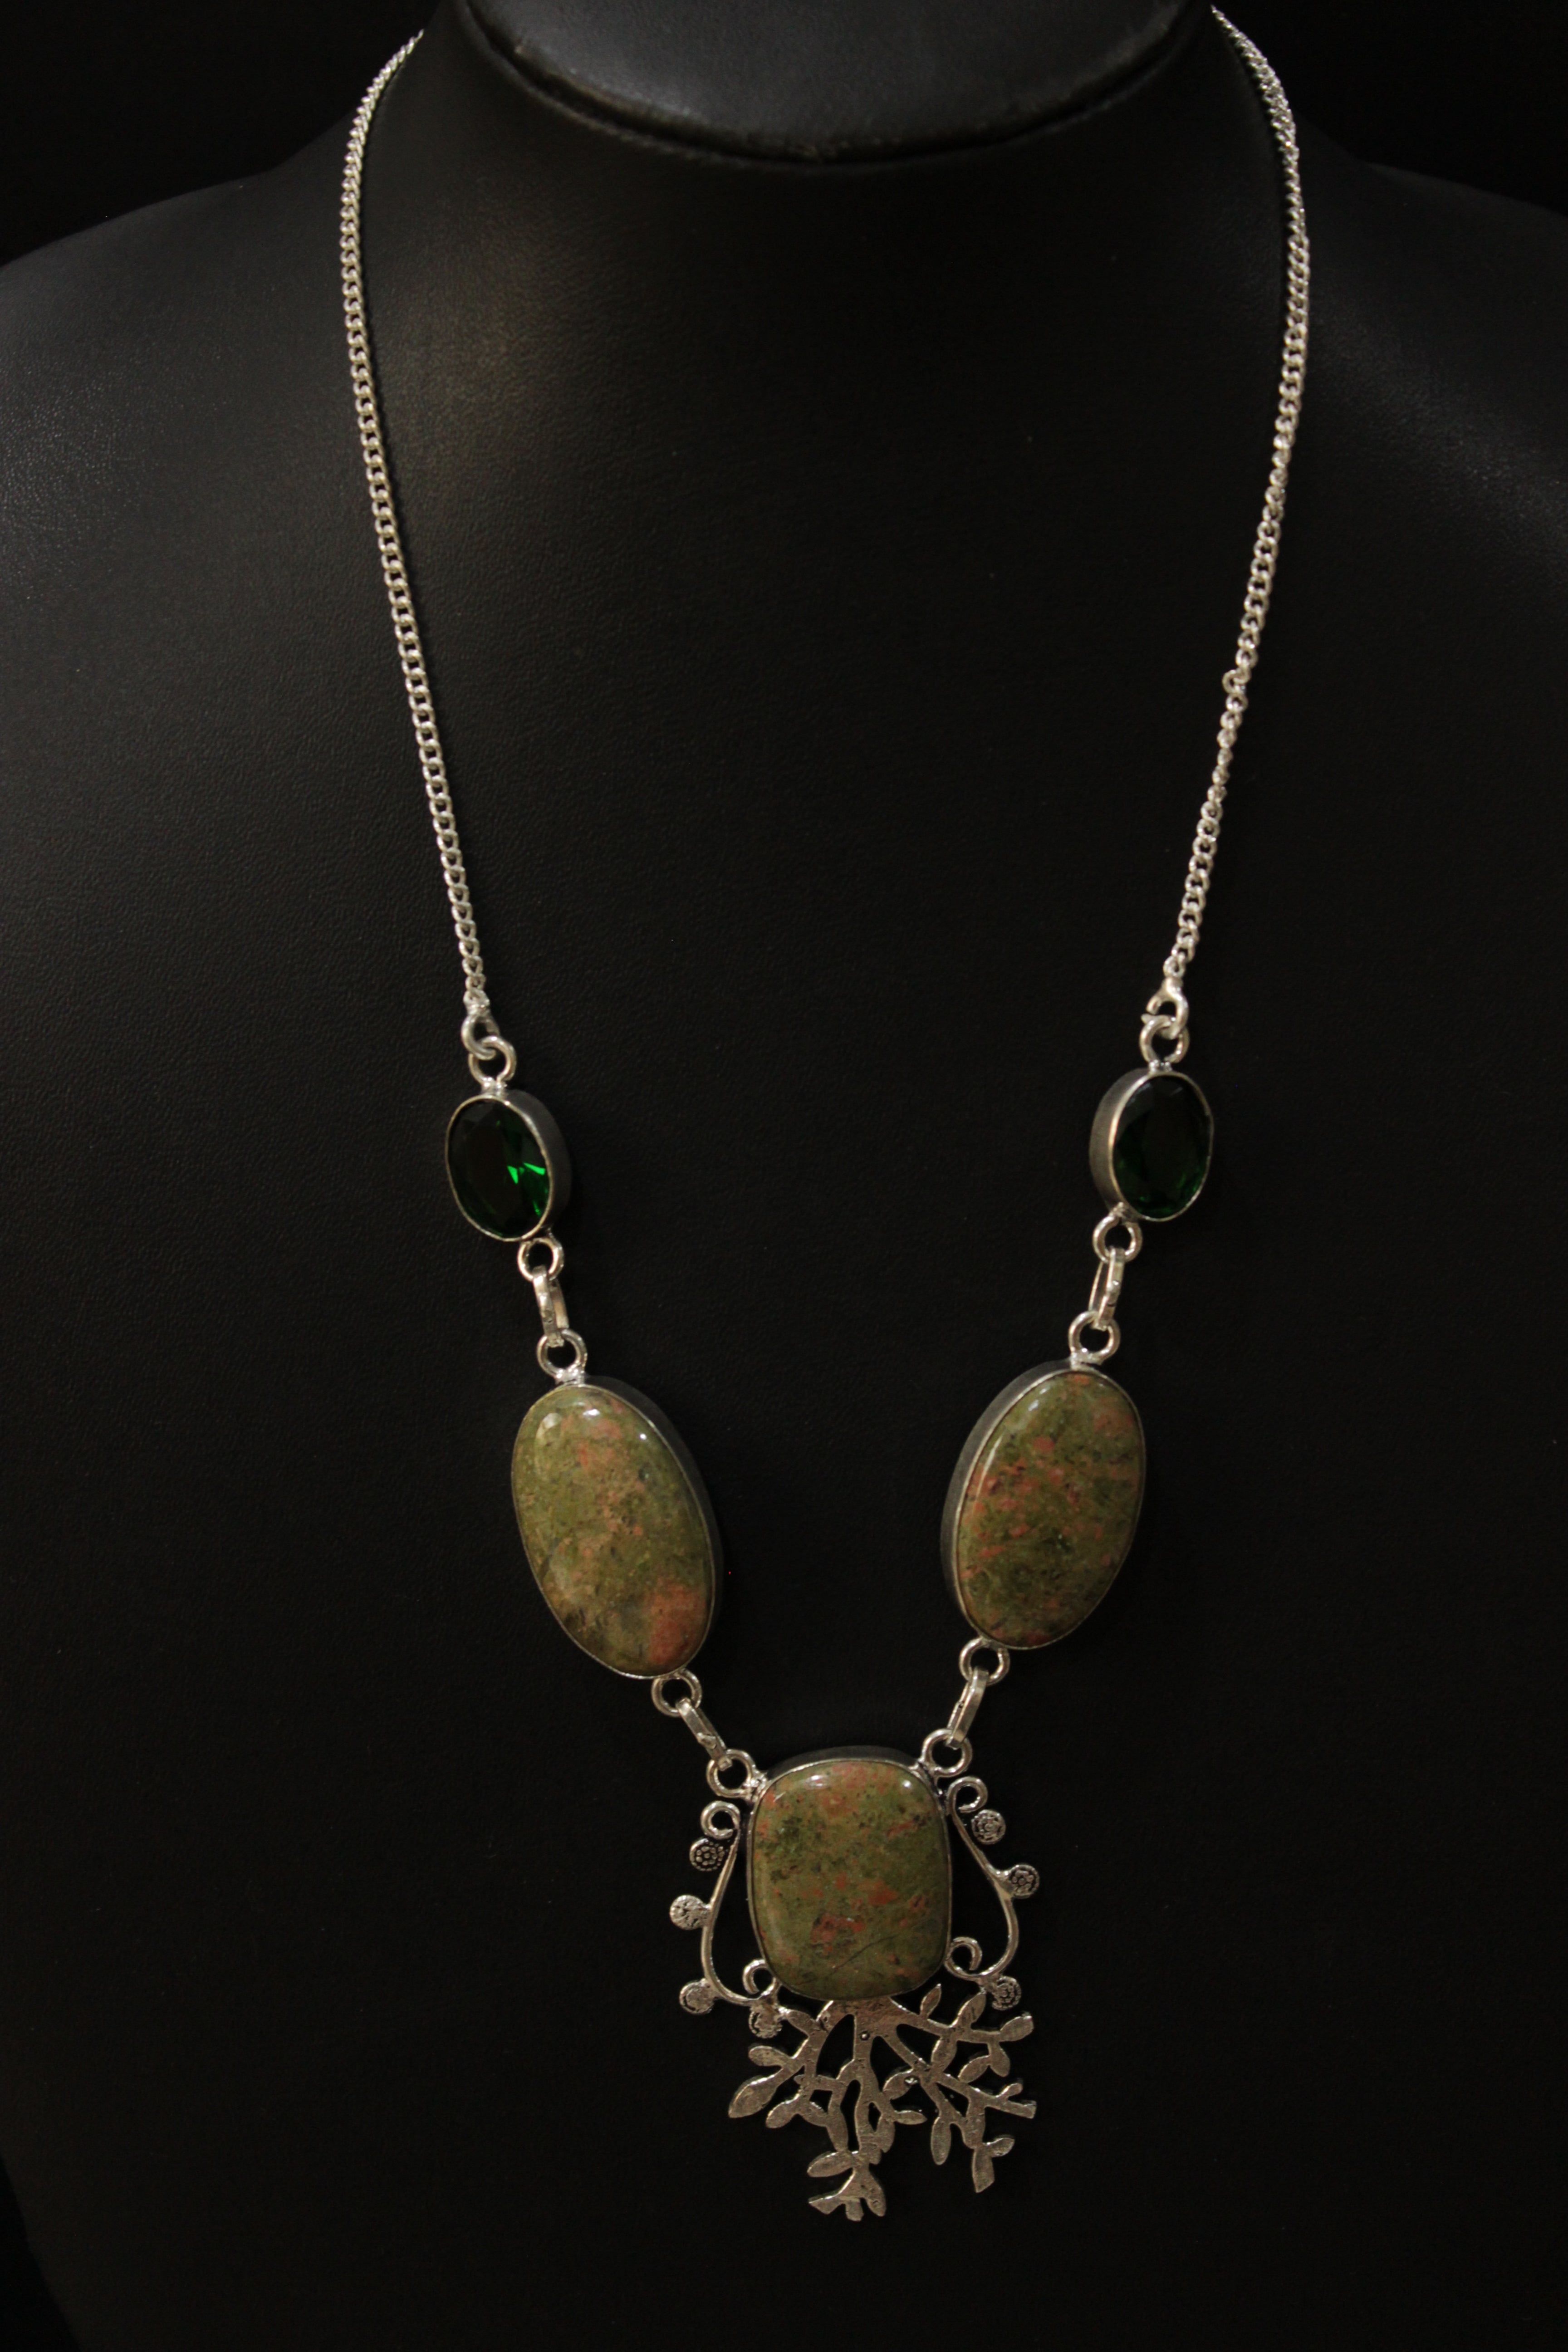 Unakite Chrome Diopside Quartz Natural Gemstone Embedded Silver Plated Necklace